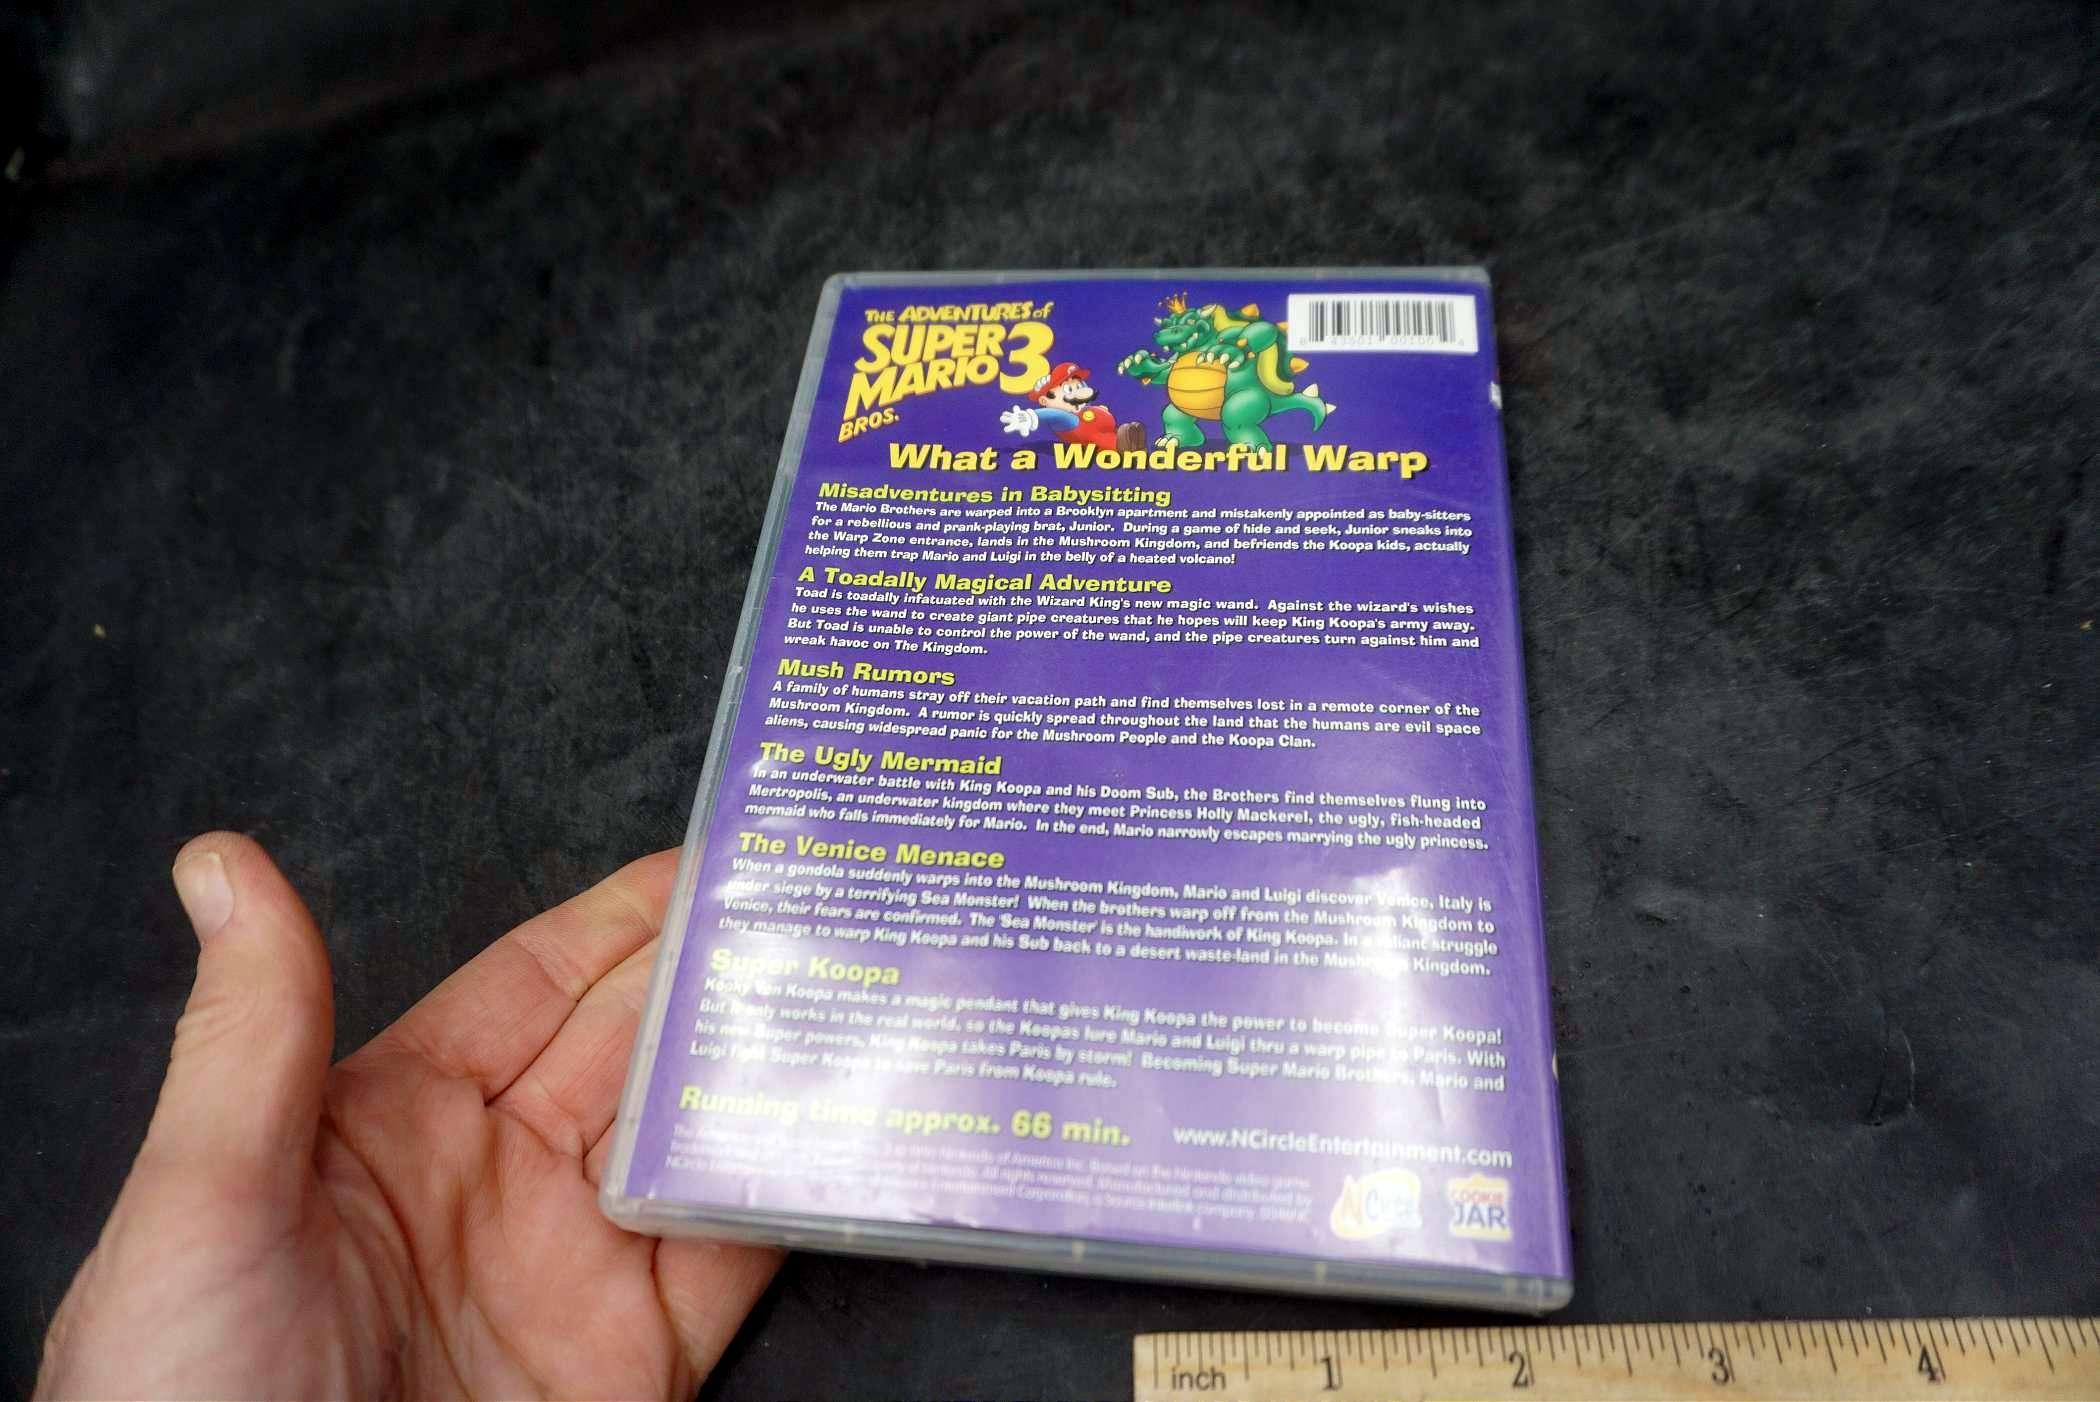 The Adventures Of Super Mario Bros. 3 - What A Wonderful Wrap Dvd